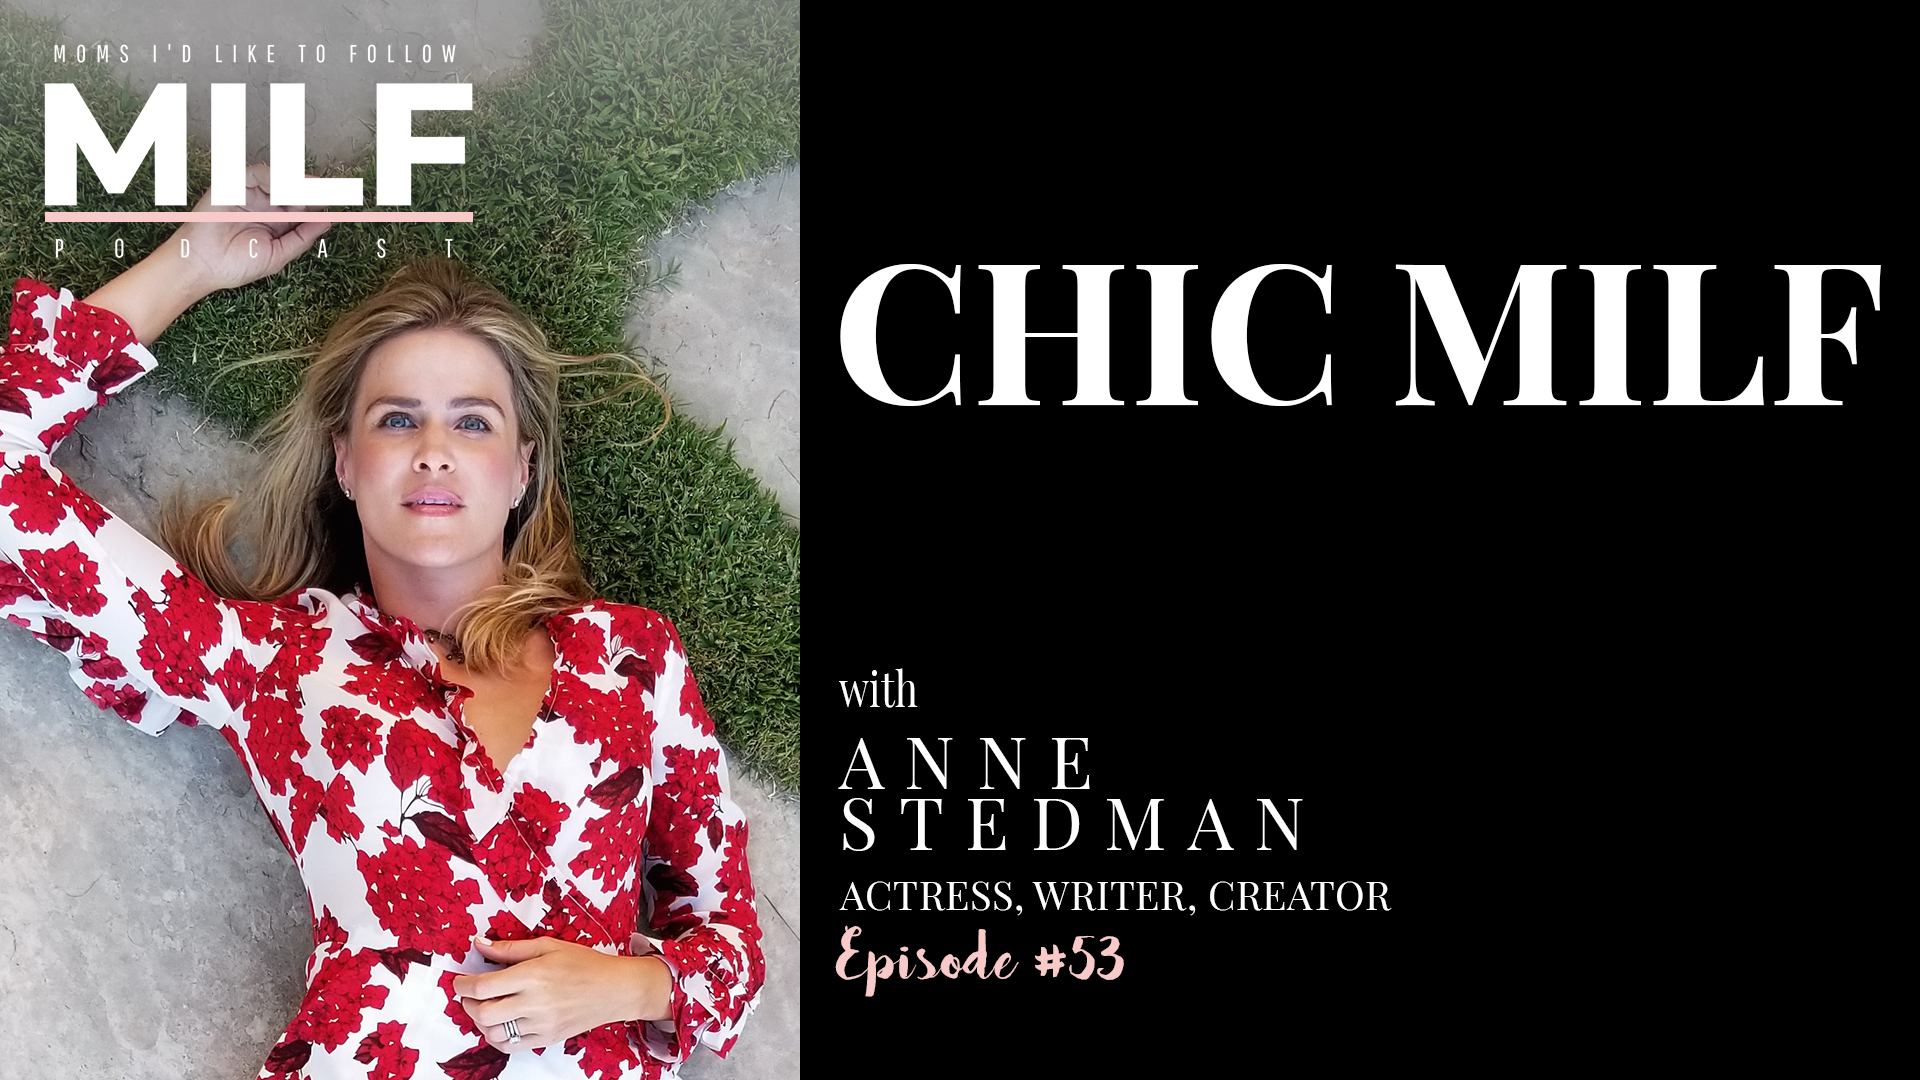 Small Boy And Milf - Chic MILF with Anne Stedman - Episode 53 - MILF PODCAST